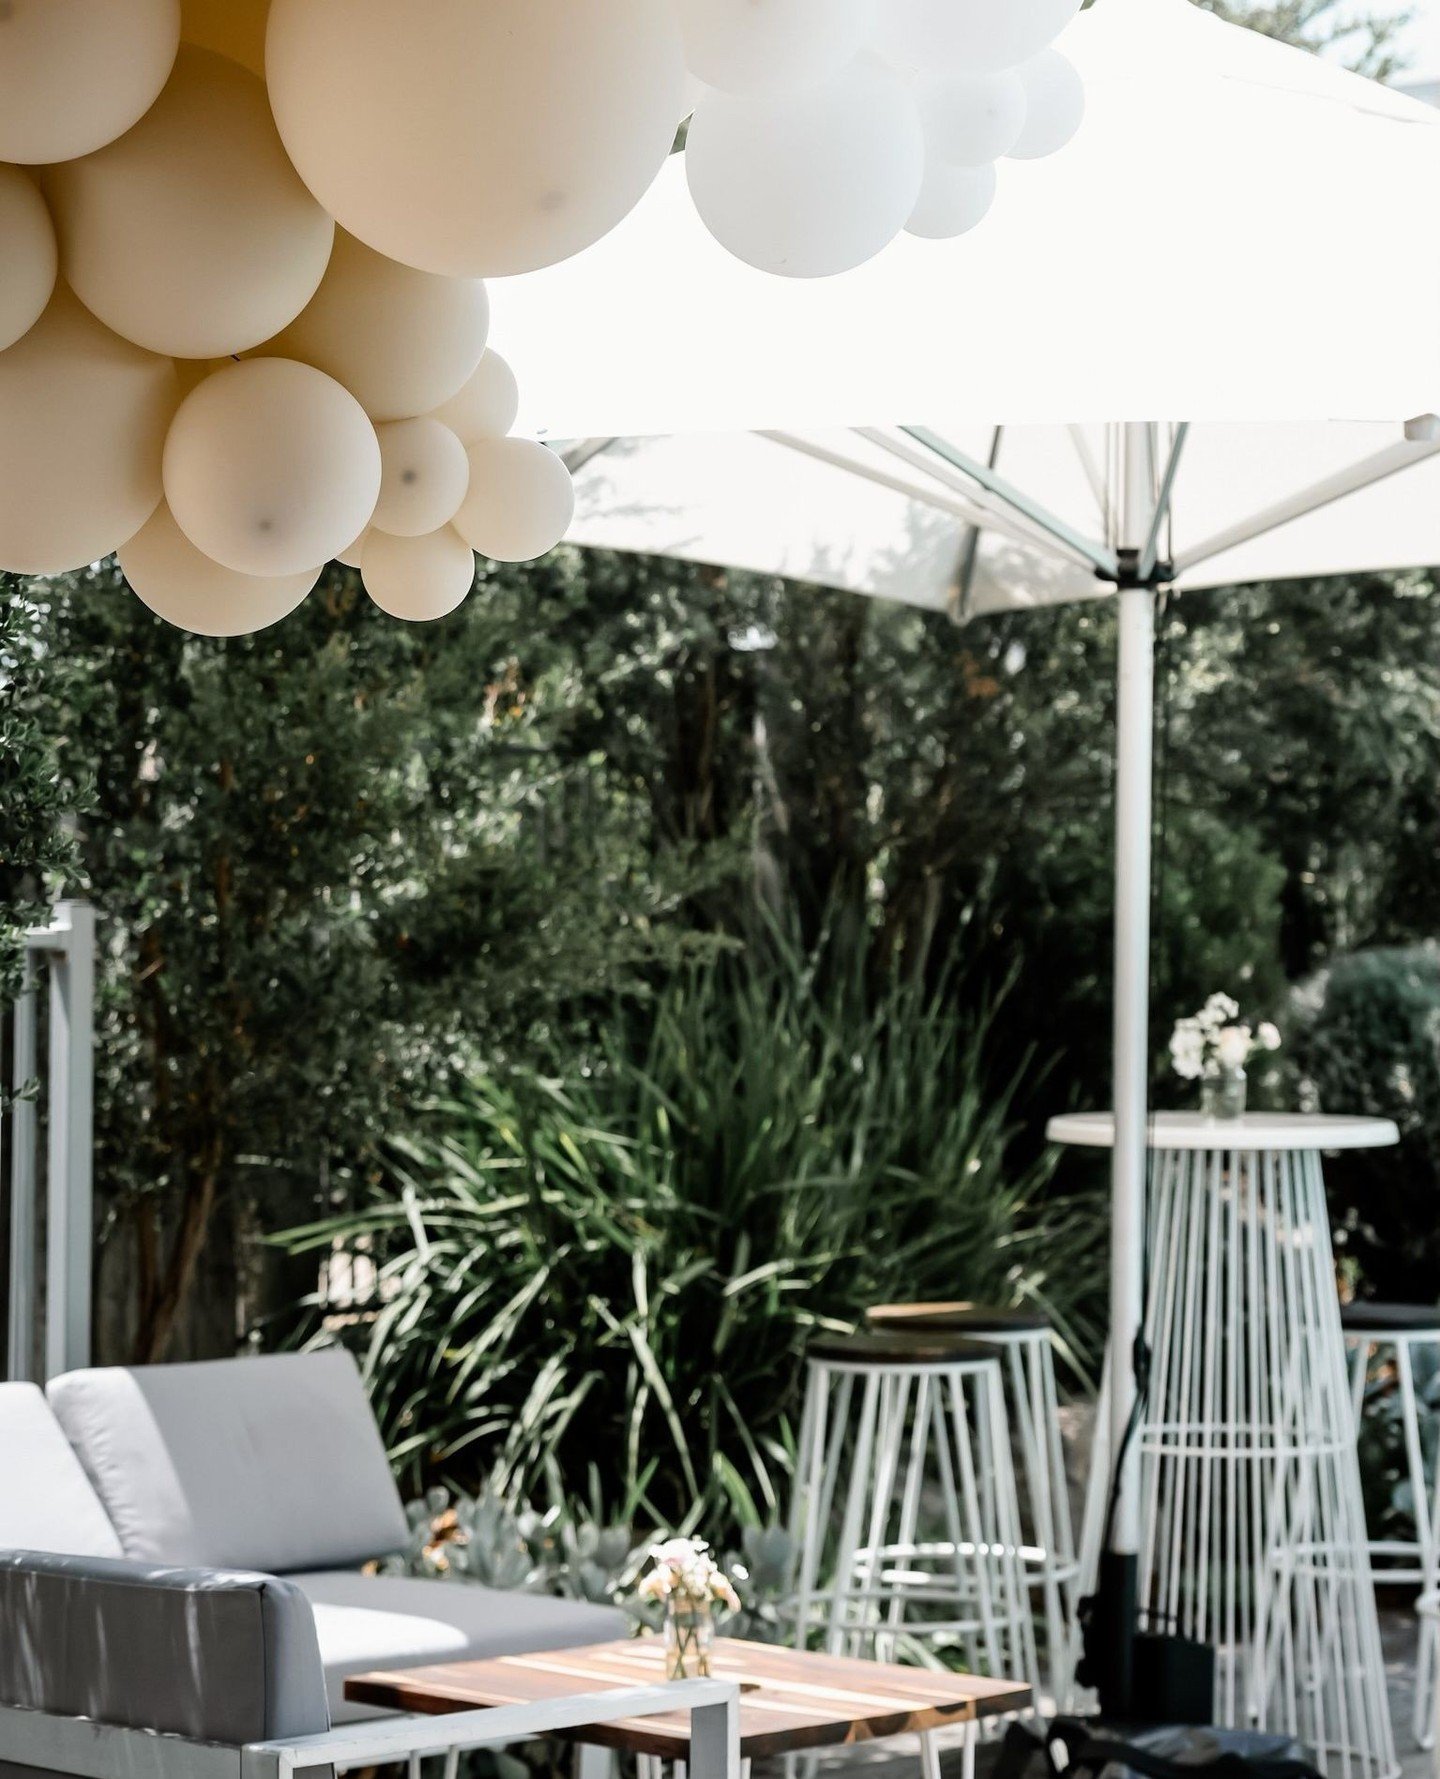 What a pretty little corner to be perched up in....⁠
⁠
⁠
#loungehire #partyhire #eventrentalmornigntonpeninsula #eventhiremornington #partyhiremornington #celebration #eventhiremornington #wirechairhire #whitechairhire